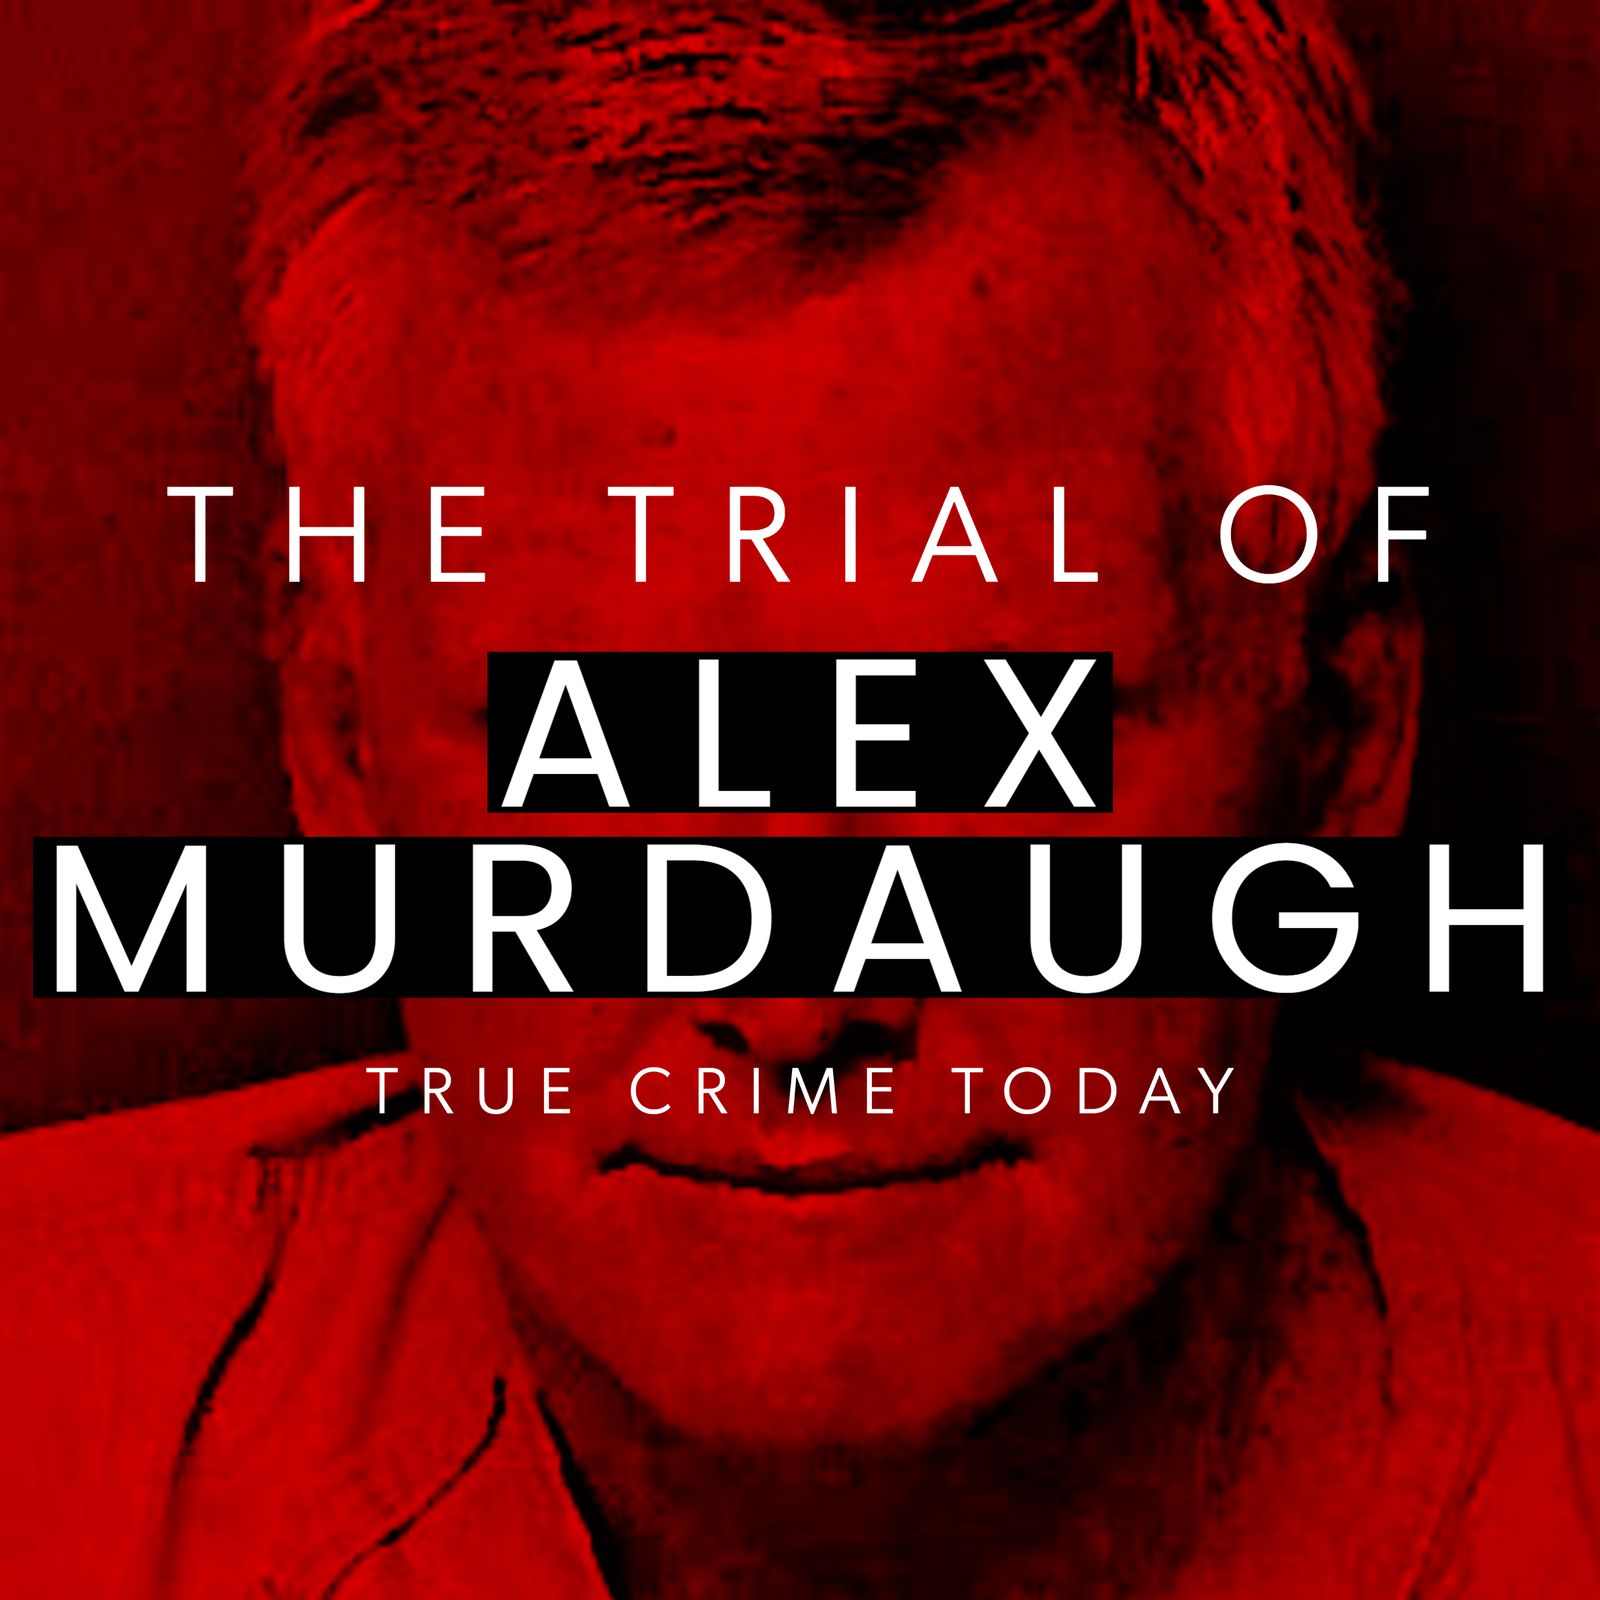 WEEK IN REVIEW-Is Alex Murdaugh Making Up Crimes To Escape Isolation